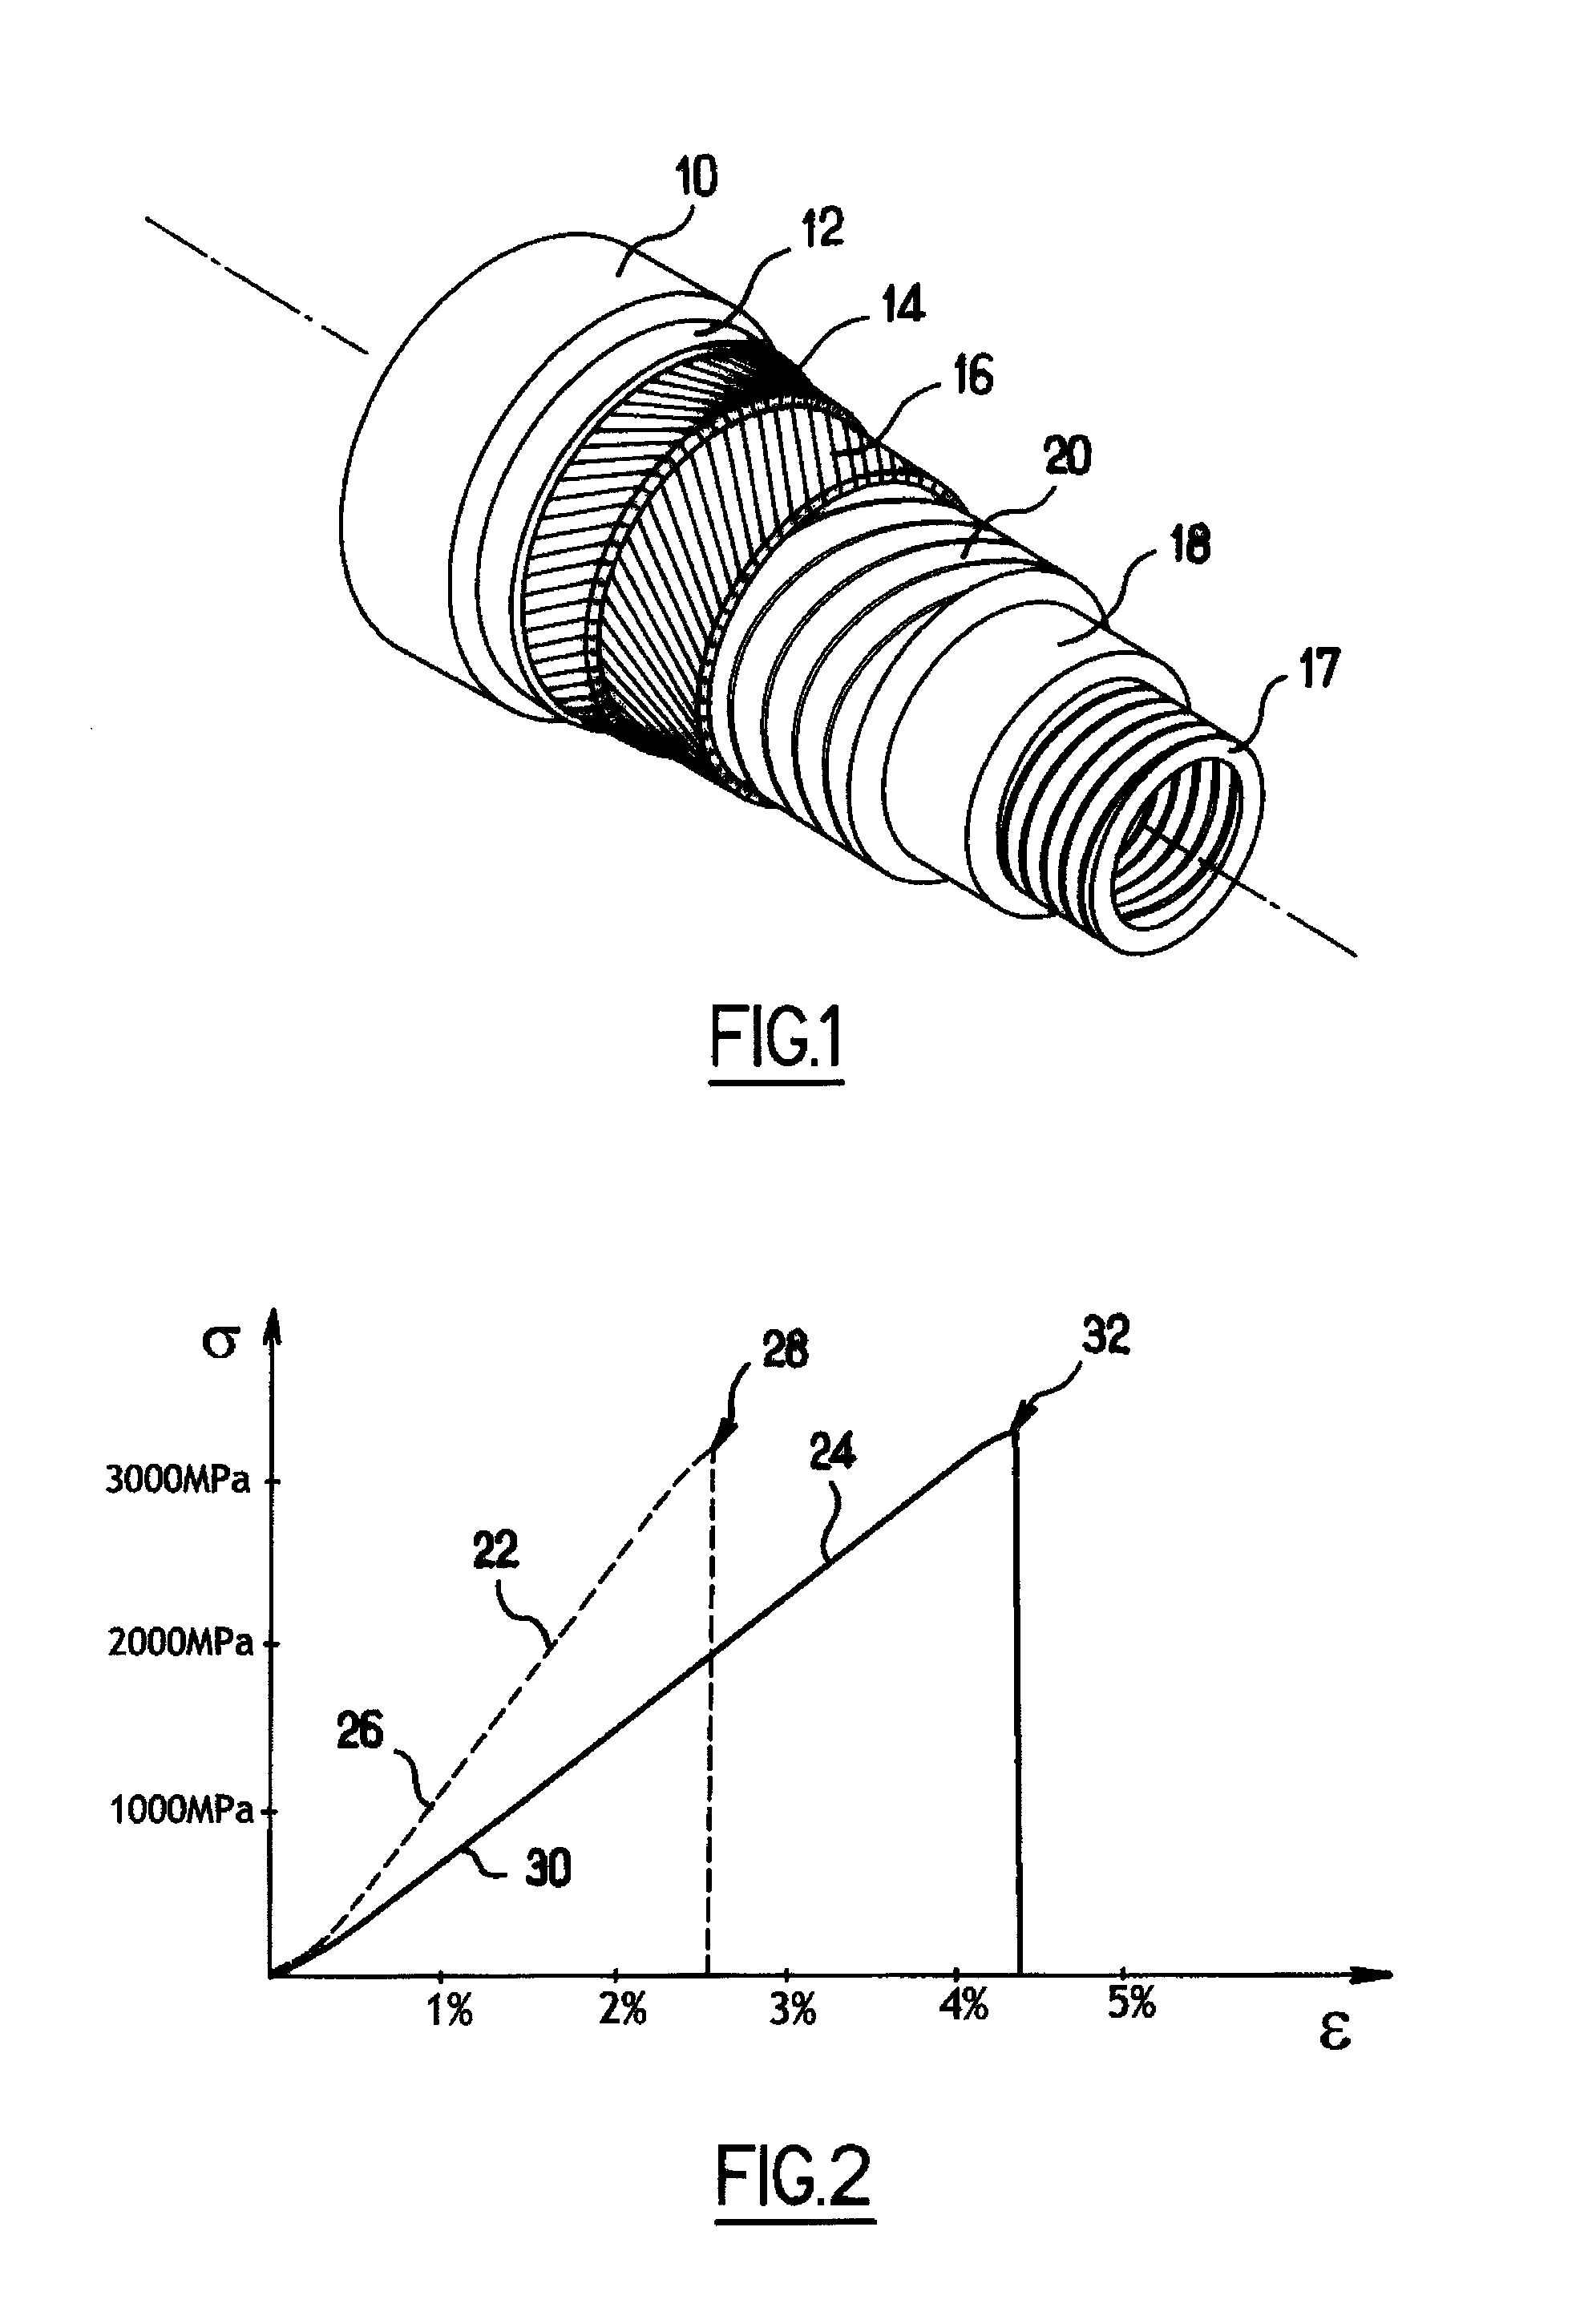 Flexible pipe for conveying hydrocarbons in deep water